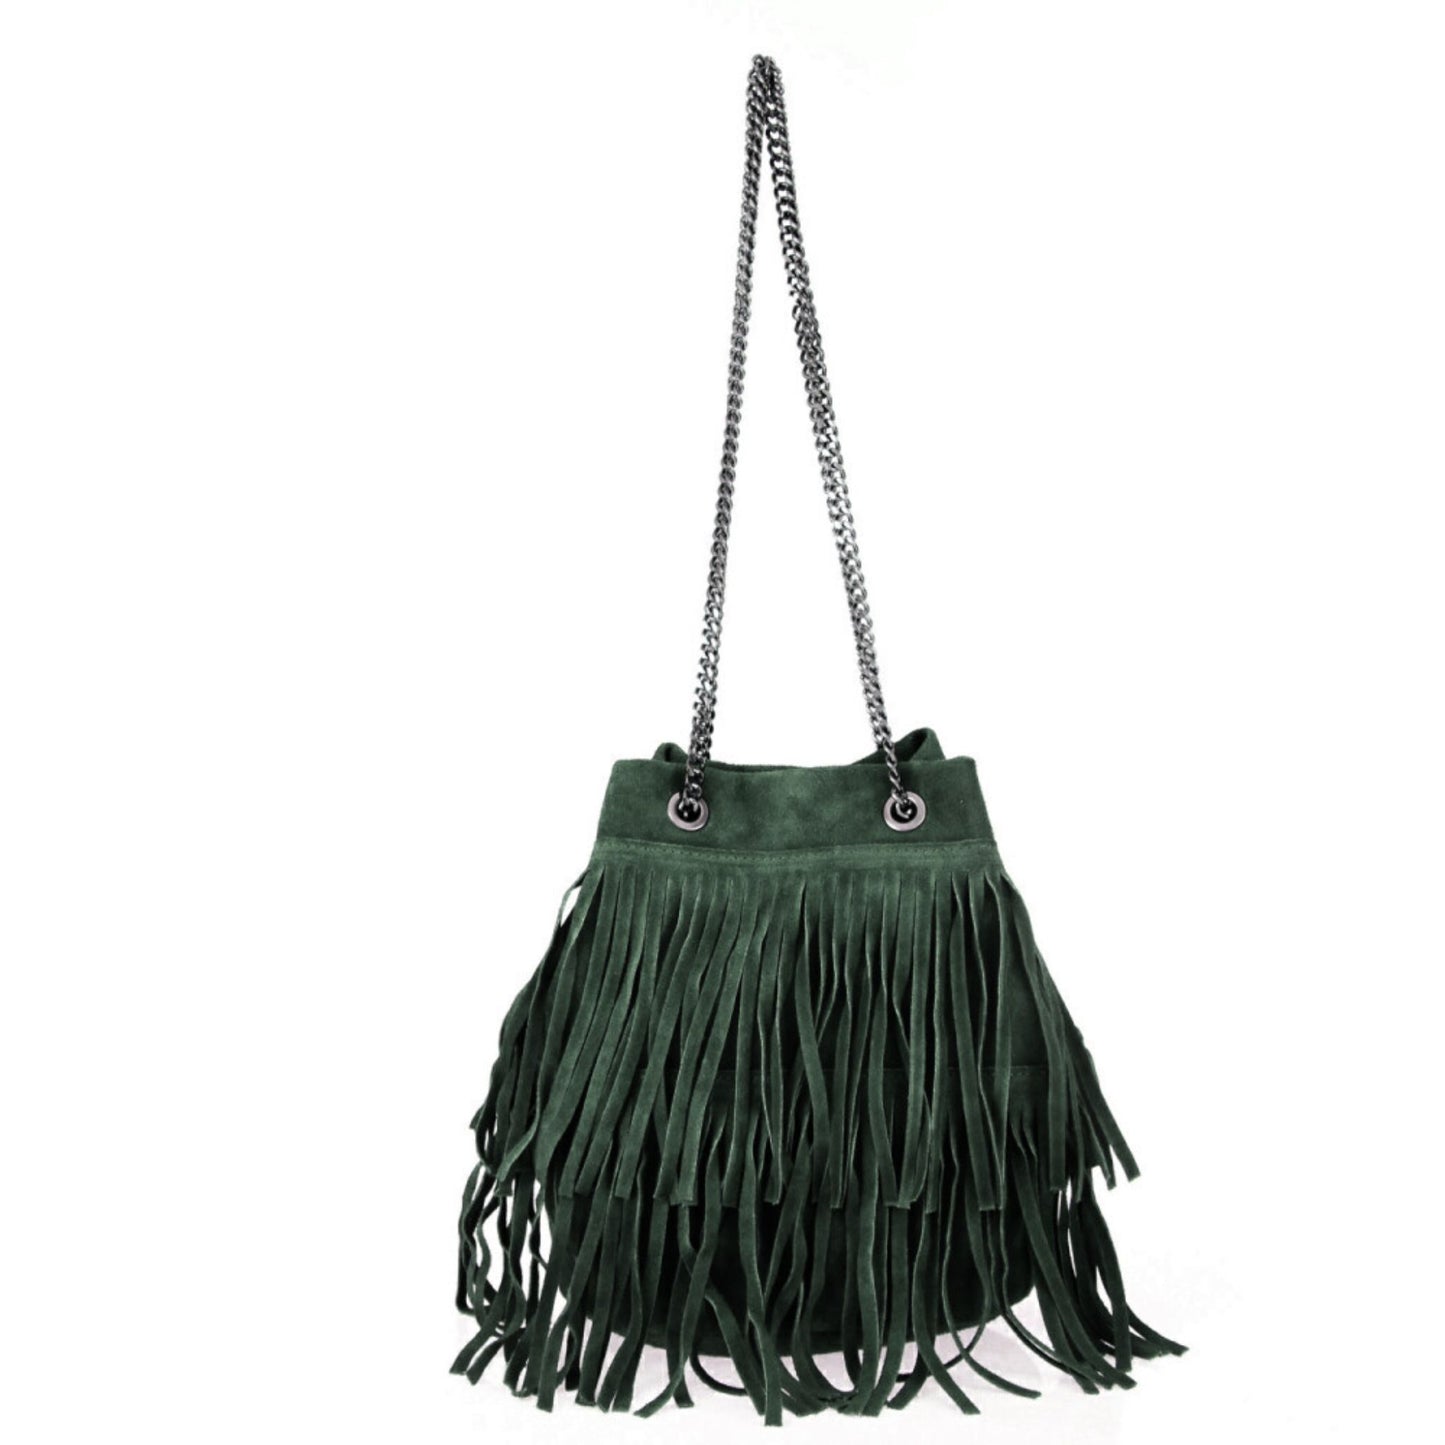 The Small Fringed Suede Bag